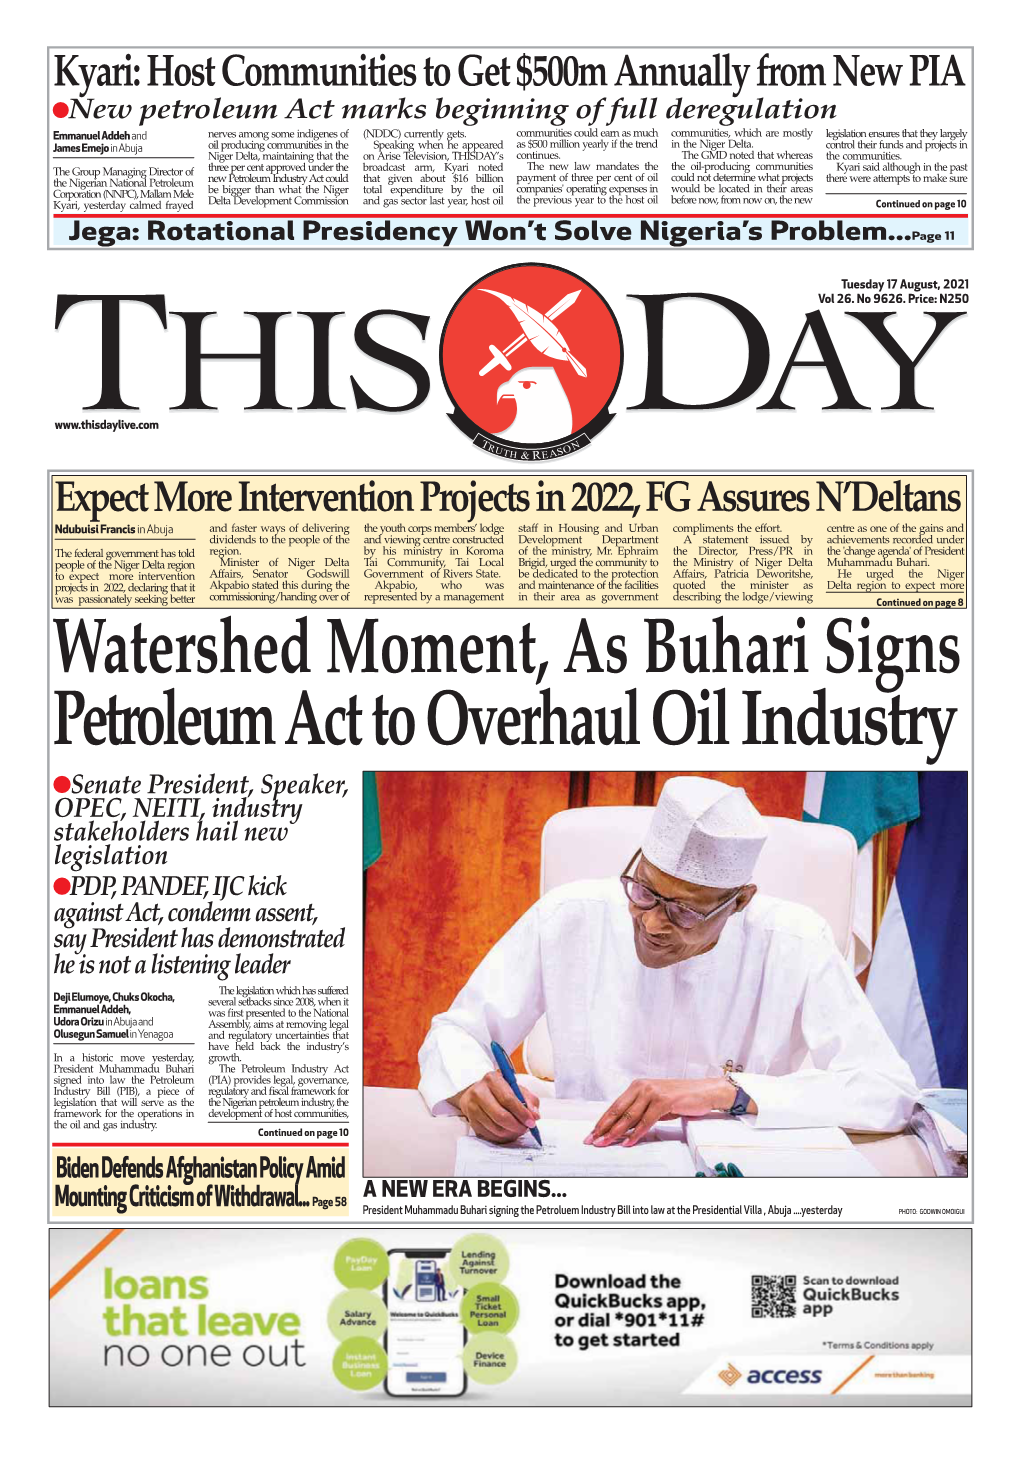 Watershed Moment, As Buhari Signs Petroleum Act to Overhaul Oil Industry